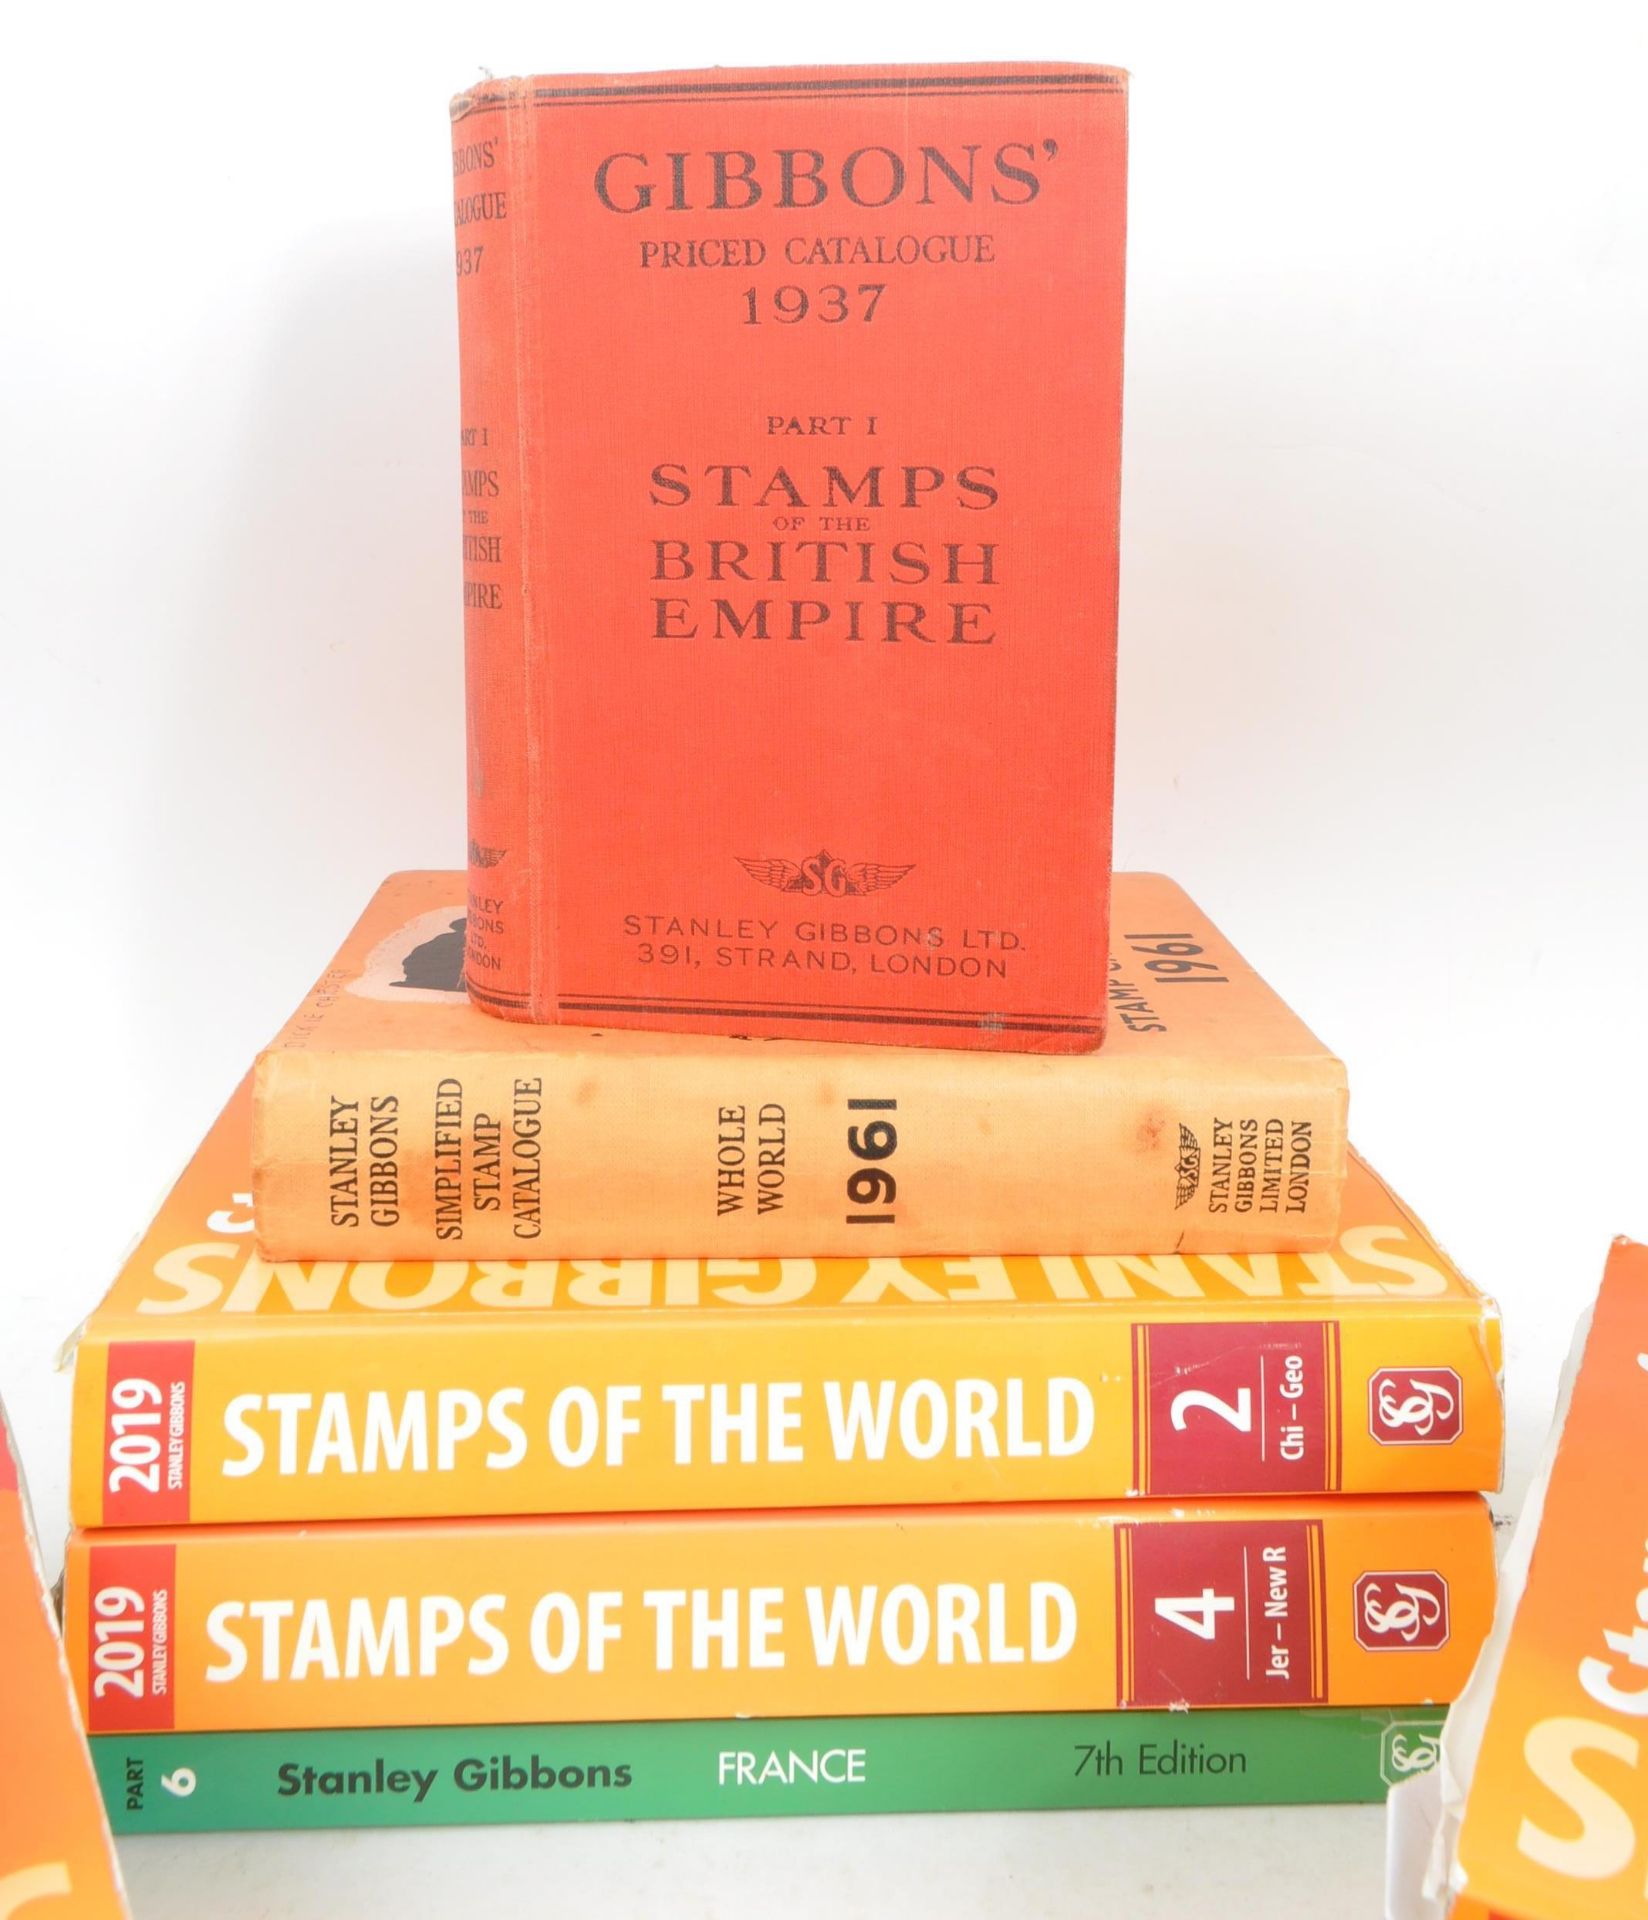 STANLEY GIBBONS - COLLECTION OF STAMP CATALOGUE BOOKS - Image 2 of 7